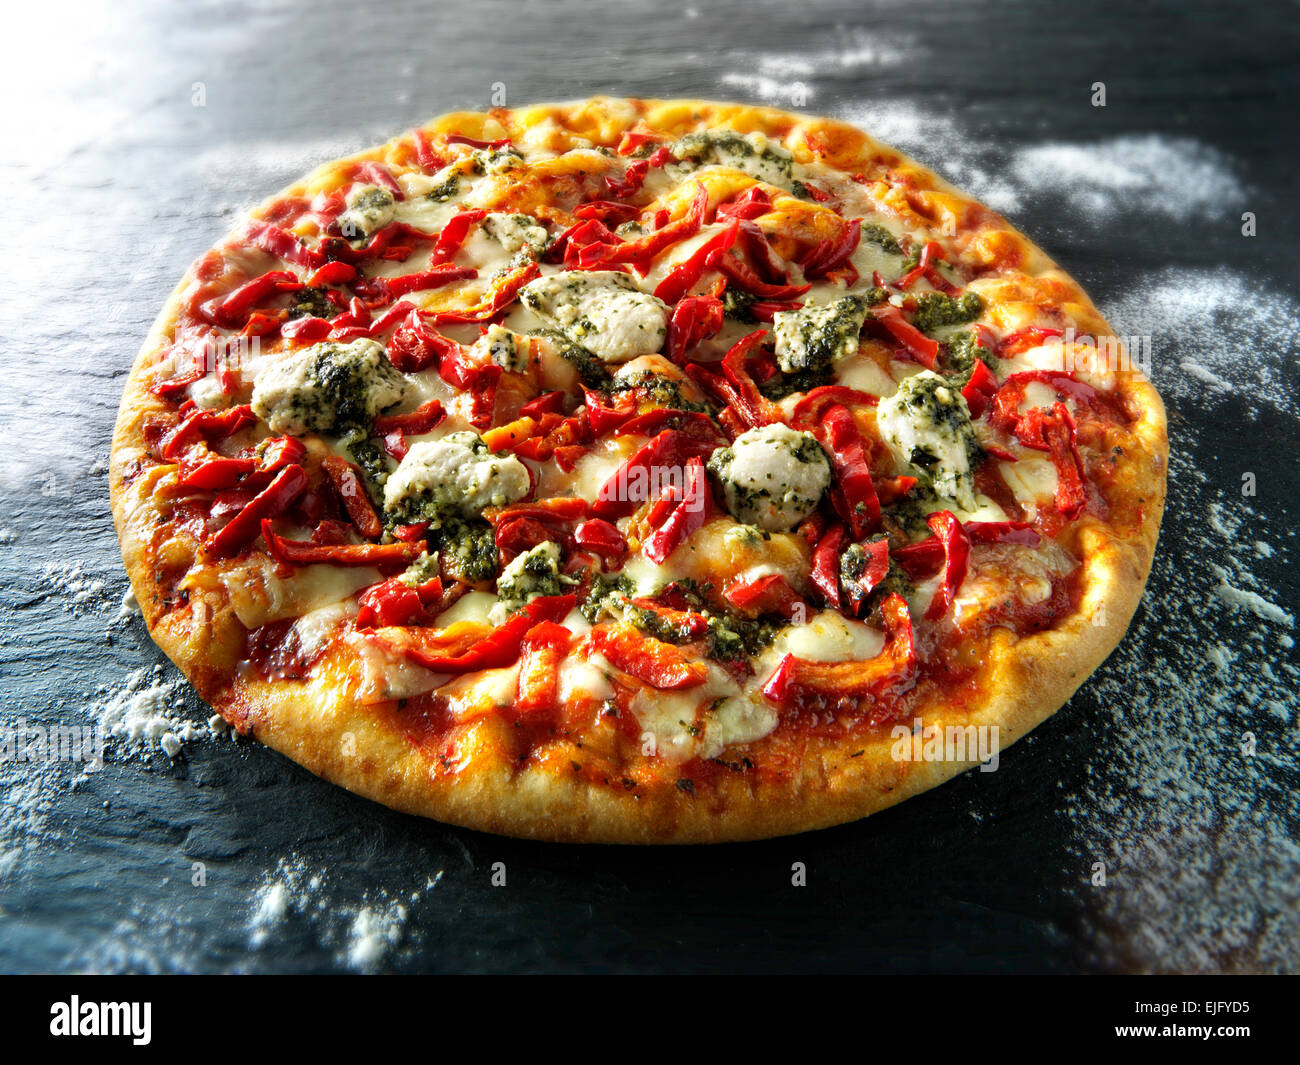 Whole Pizza topped with pesto  chicken and red peppers Stock Photo